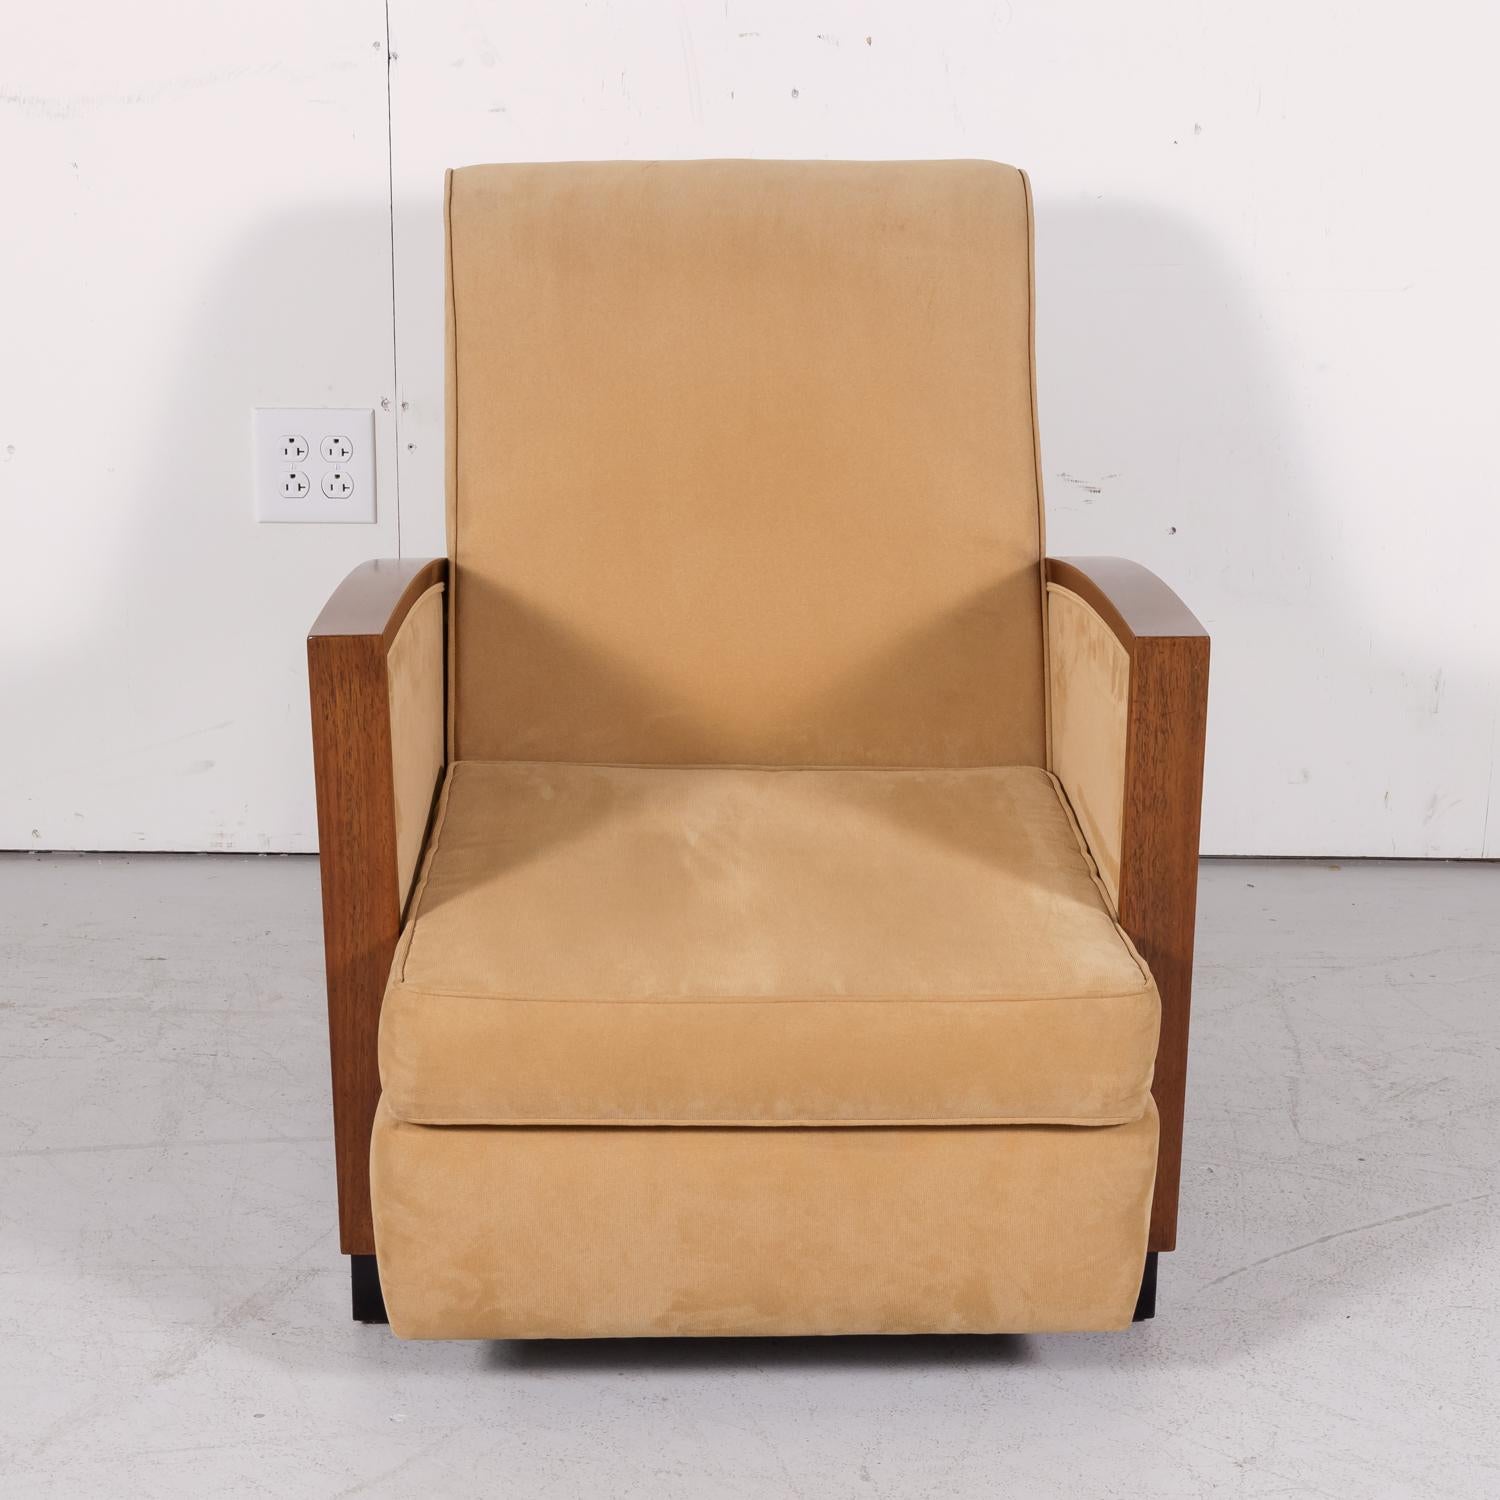 1930s French Art Deco Period Walnut Armchair or Lounge Chair For Sale 2